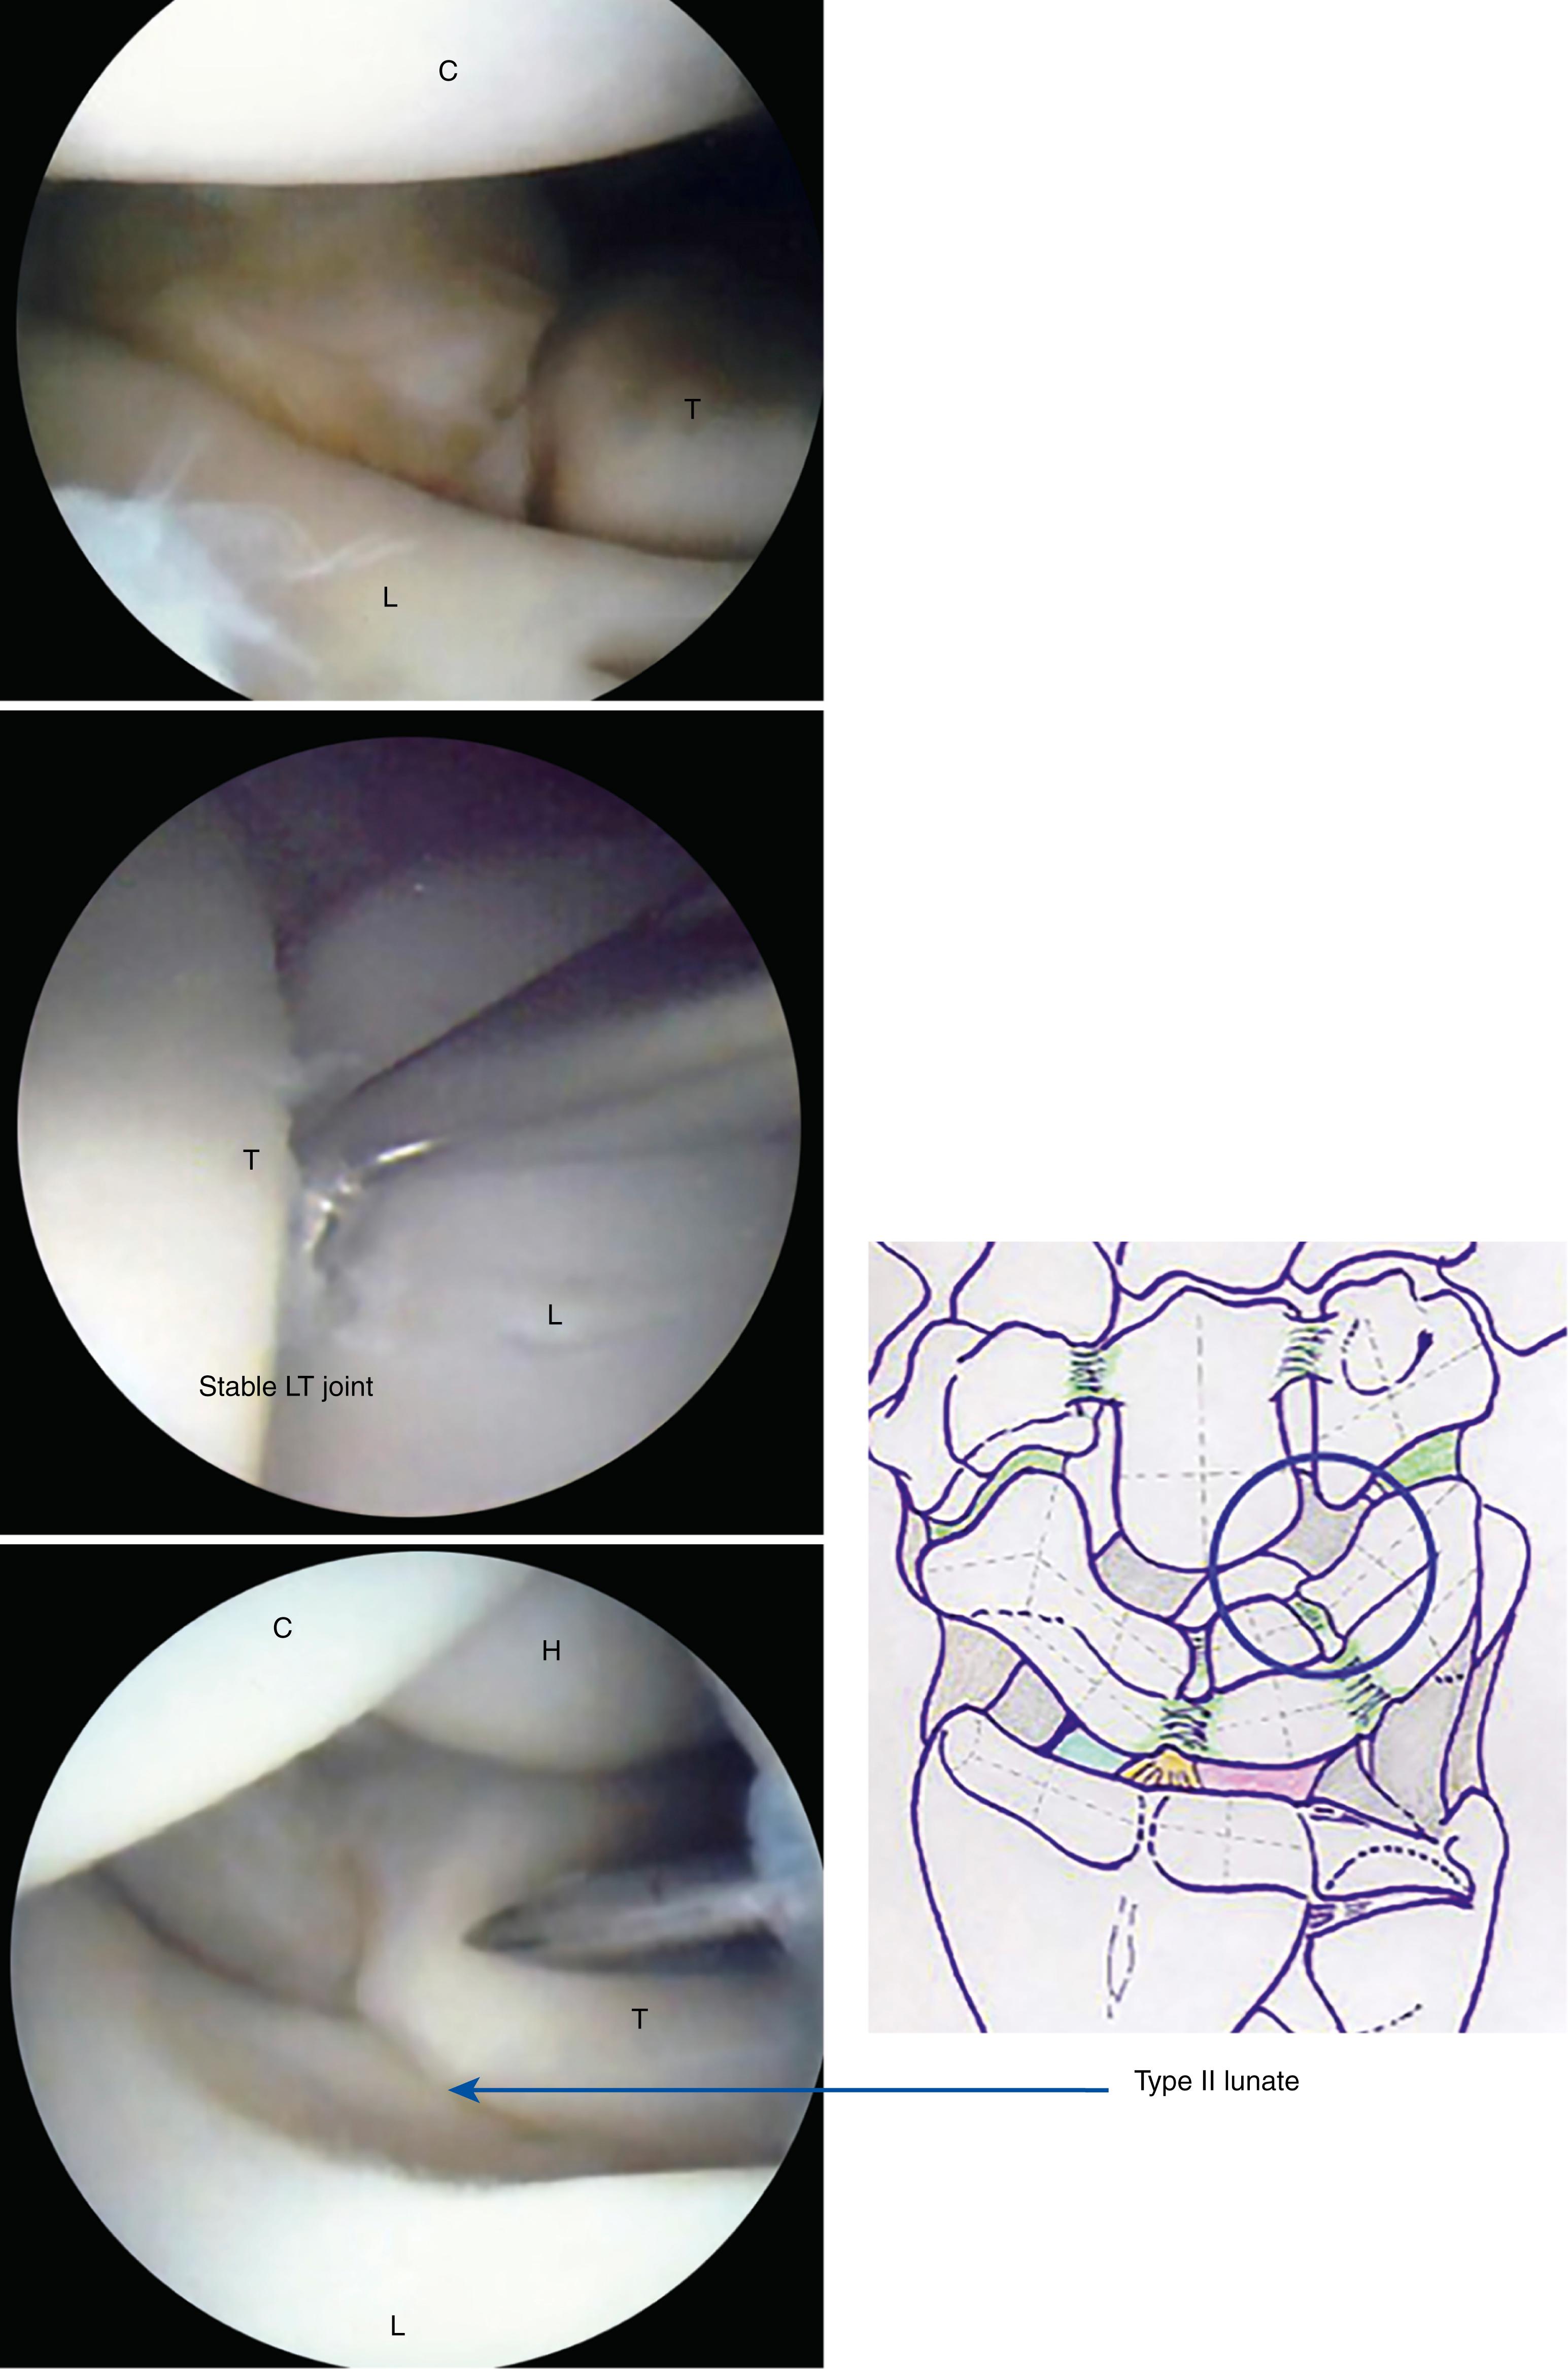 eFig. 17.25, Capitolunate joint and lunotriquetral joint. Note the second facet articulating with hamate in type II lunate. C, Capitate; H, hamate; L, lunate; T, triquetrum.